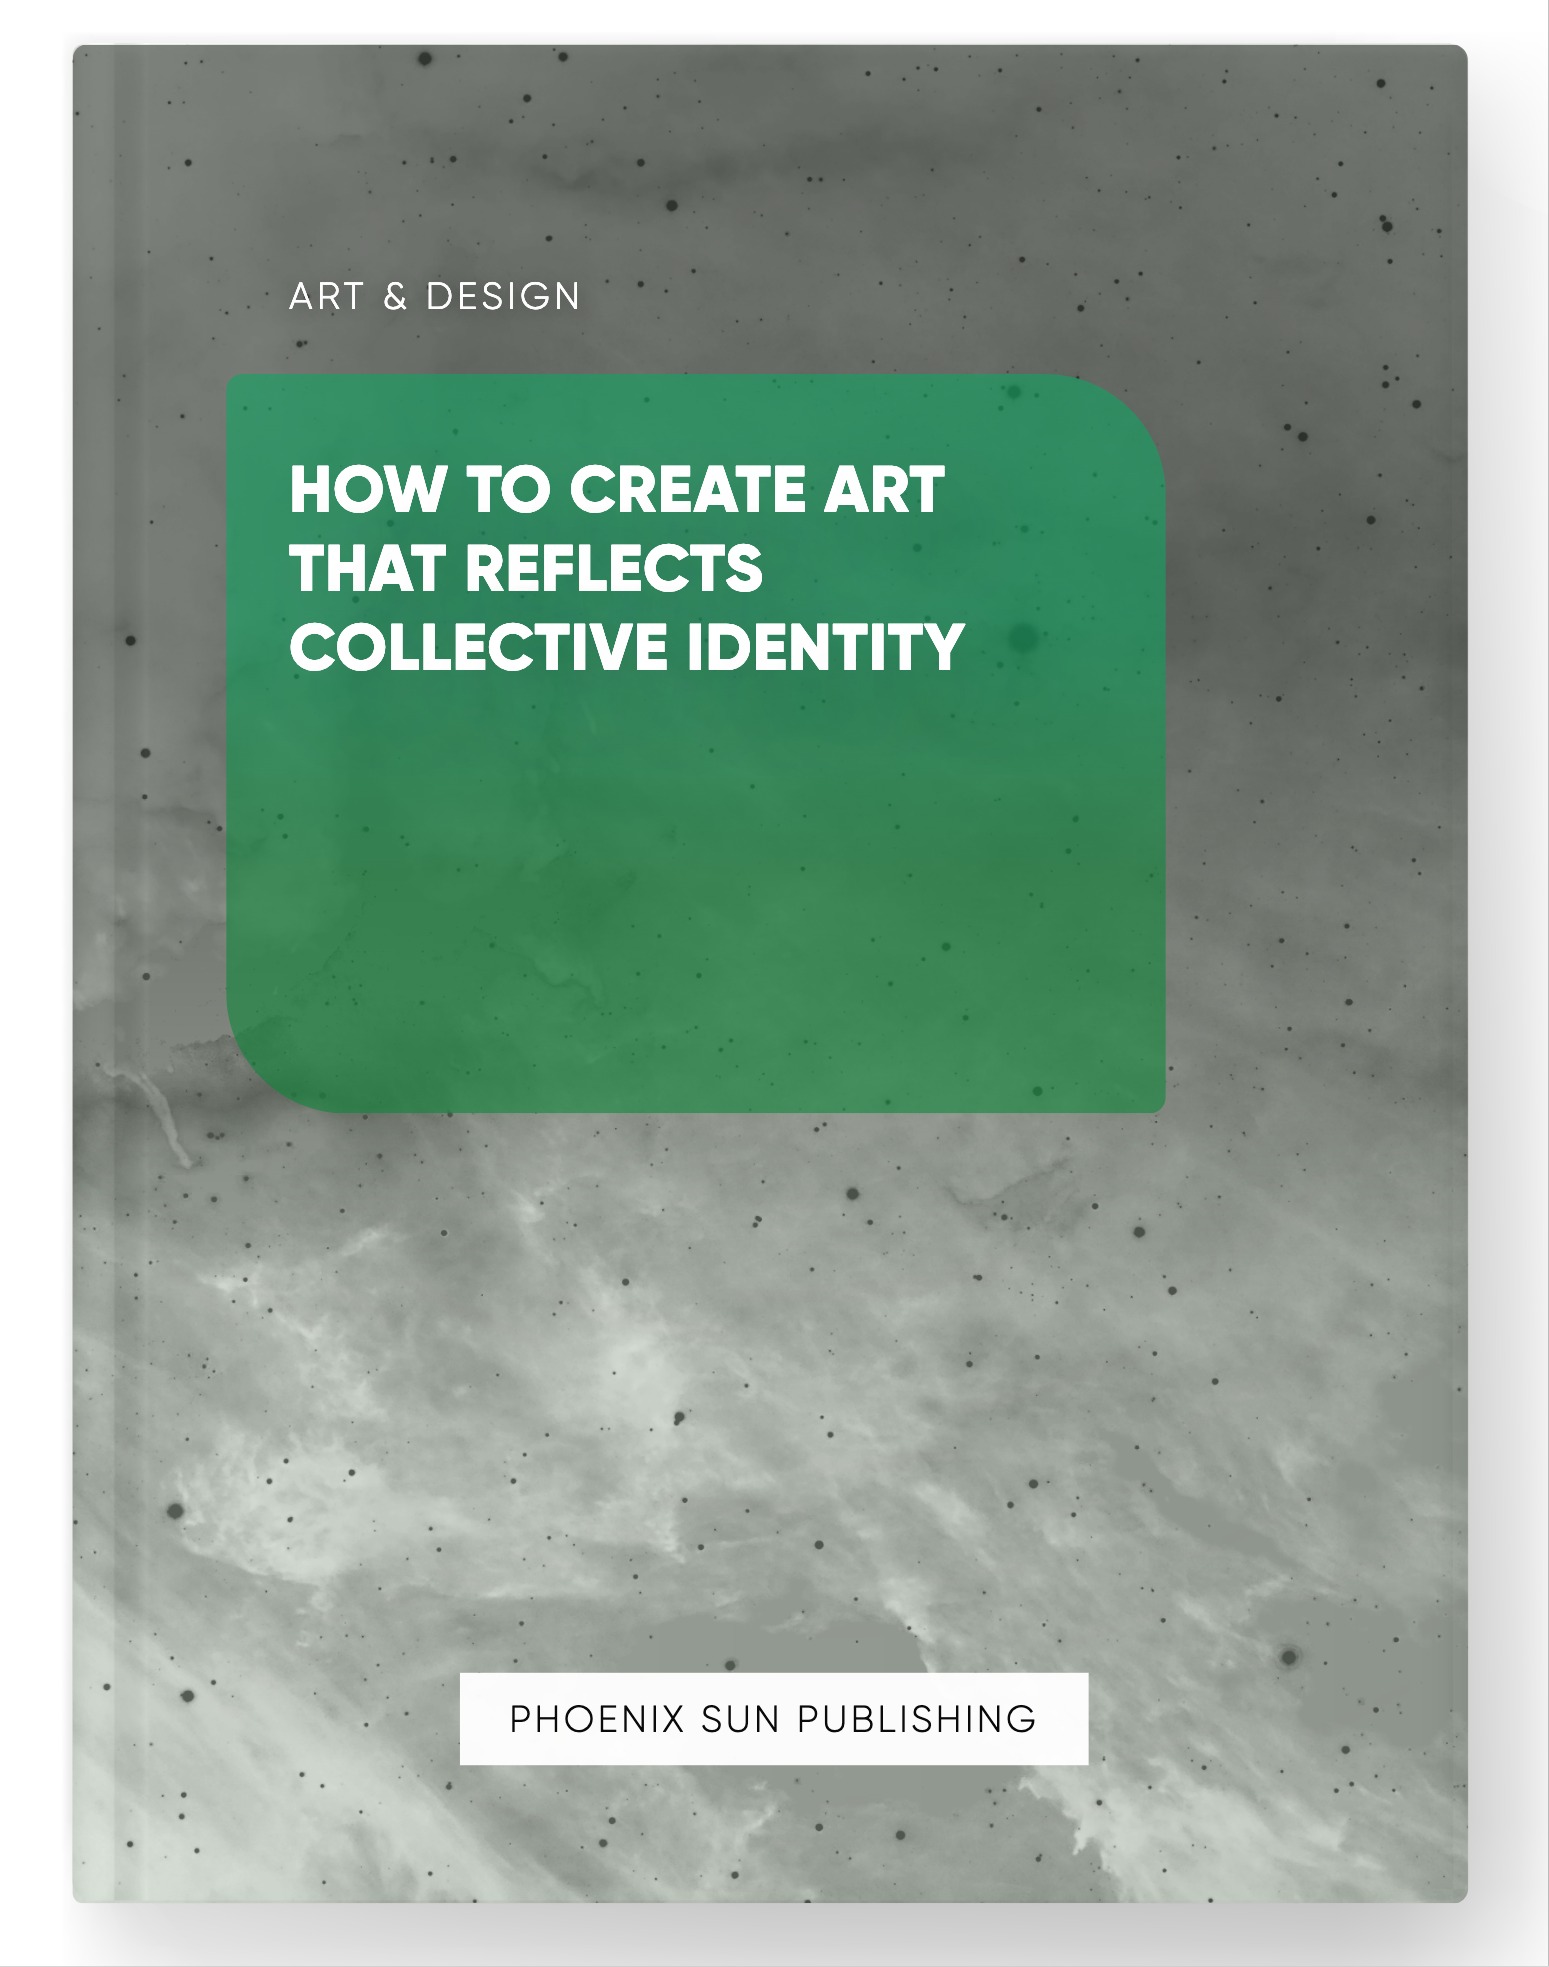 How to Create Art that Reflects Collective Identity